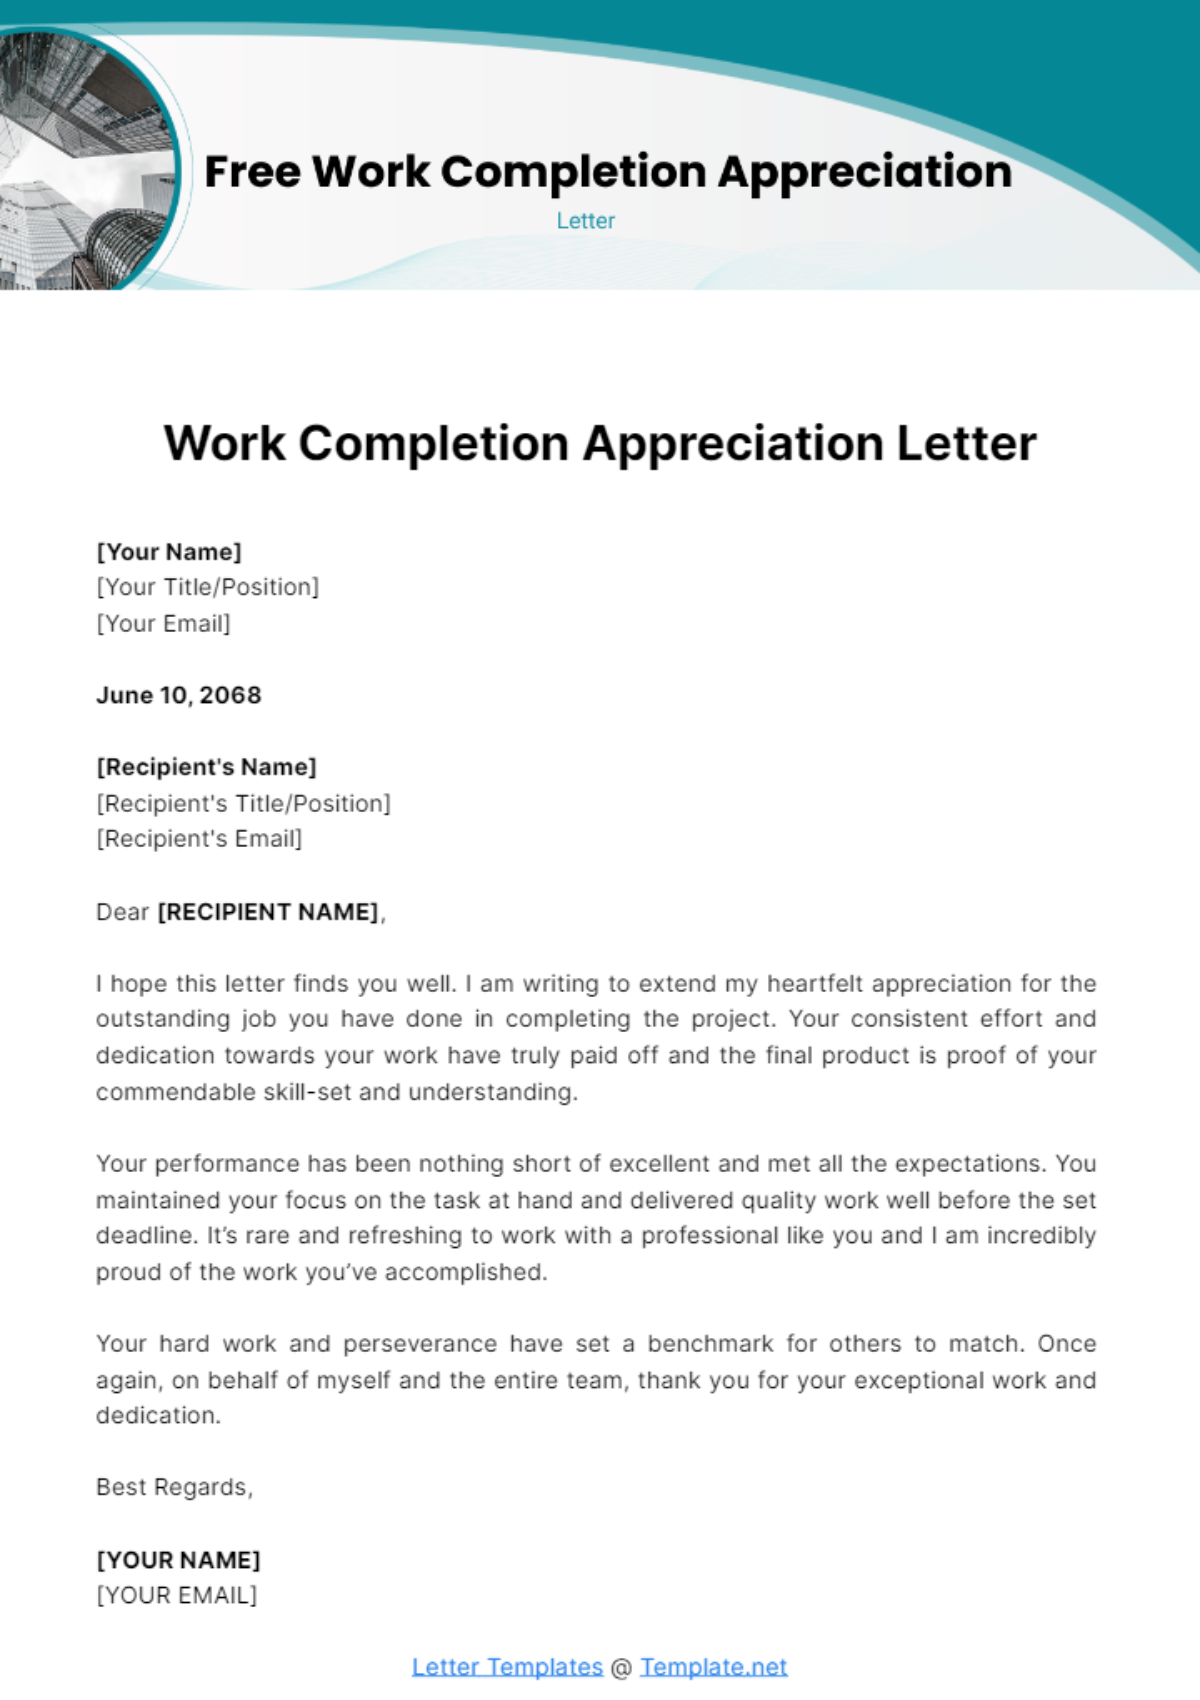 Free Work Completion Appreciation Letter Template